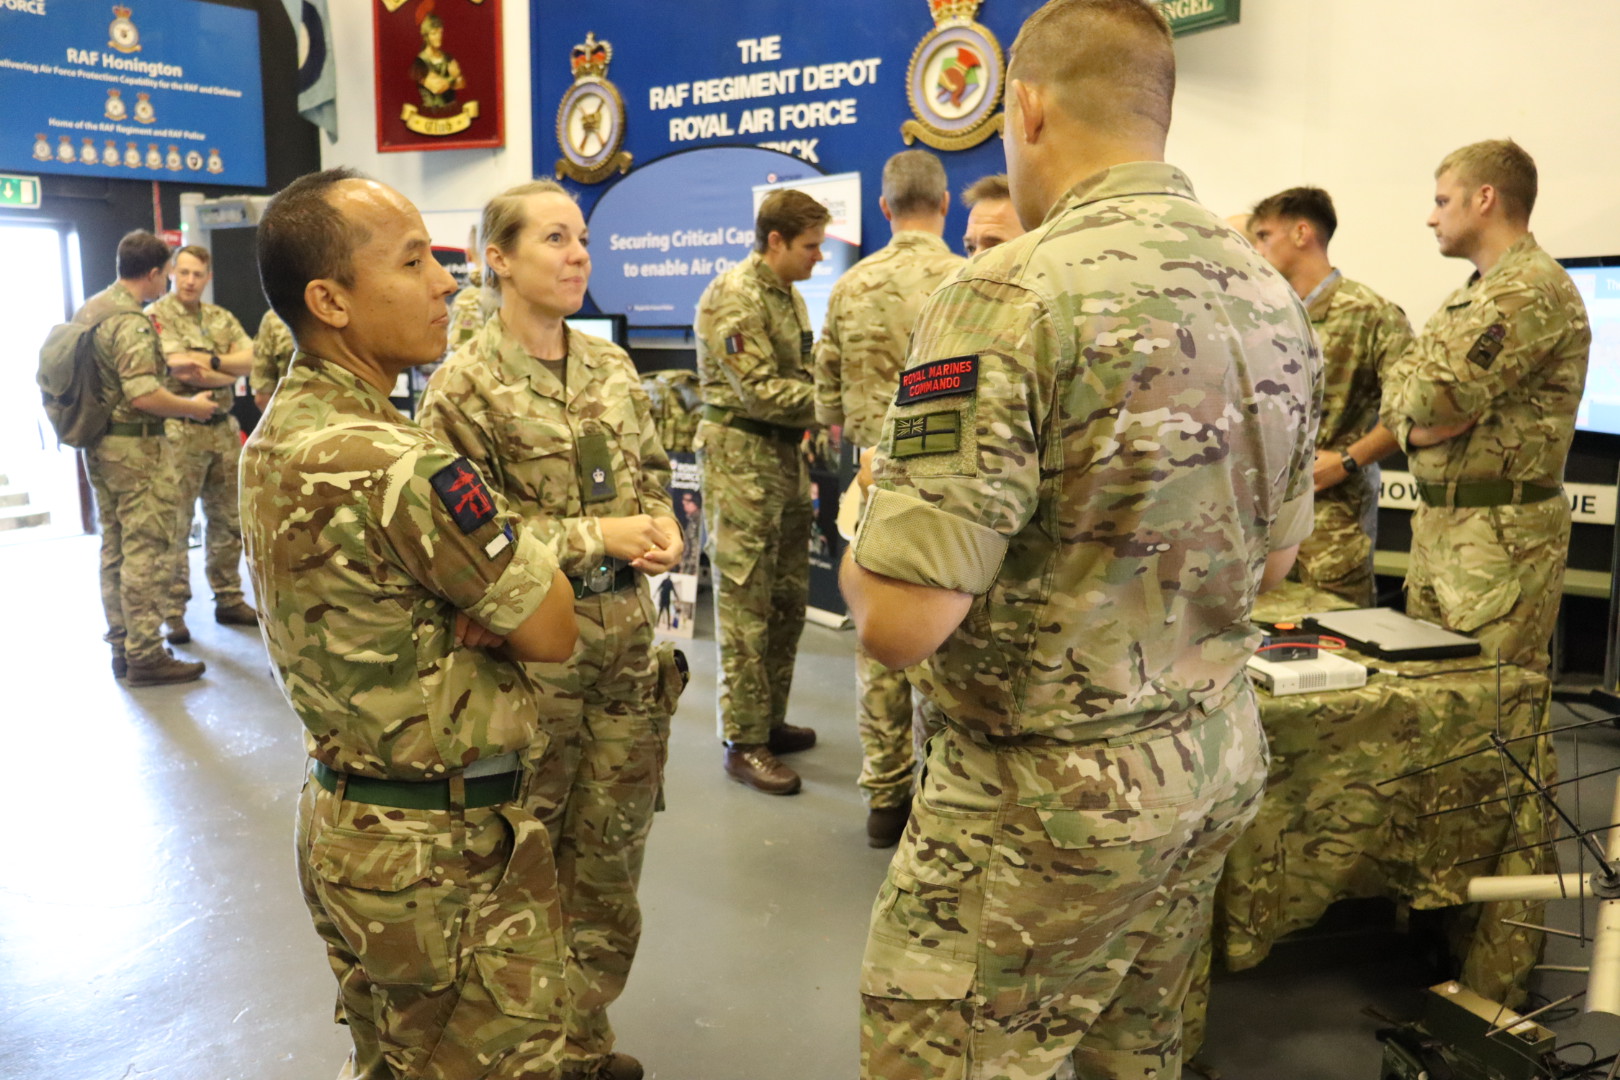 Military personnel from different services, chatting at the conference